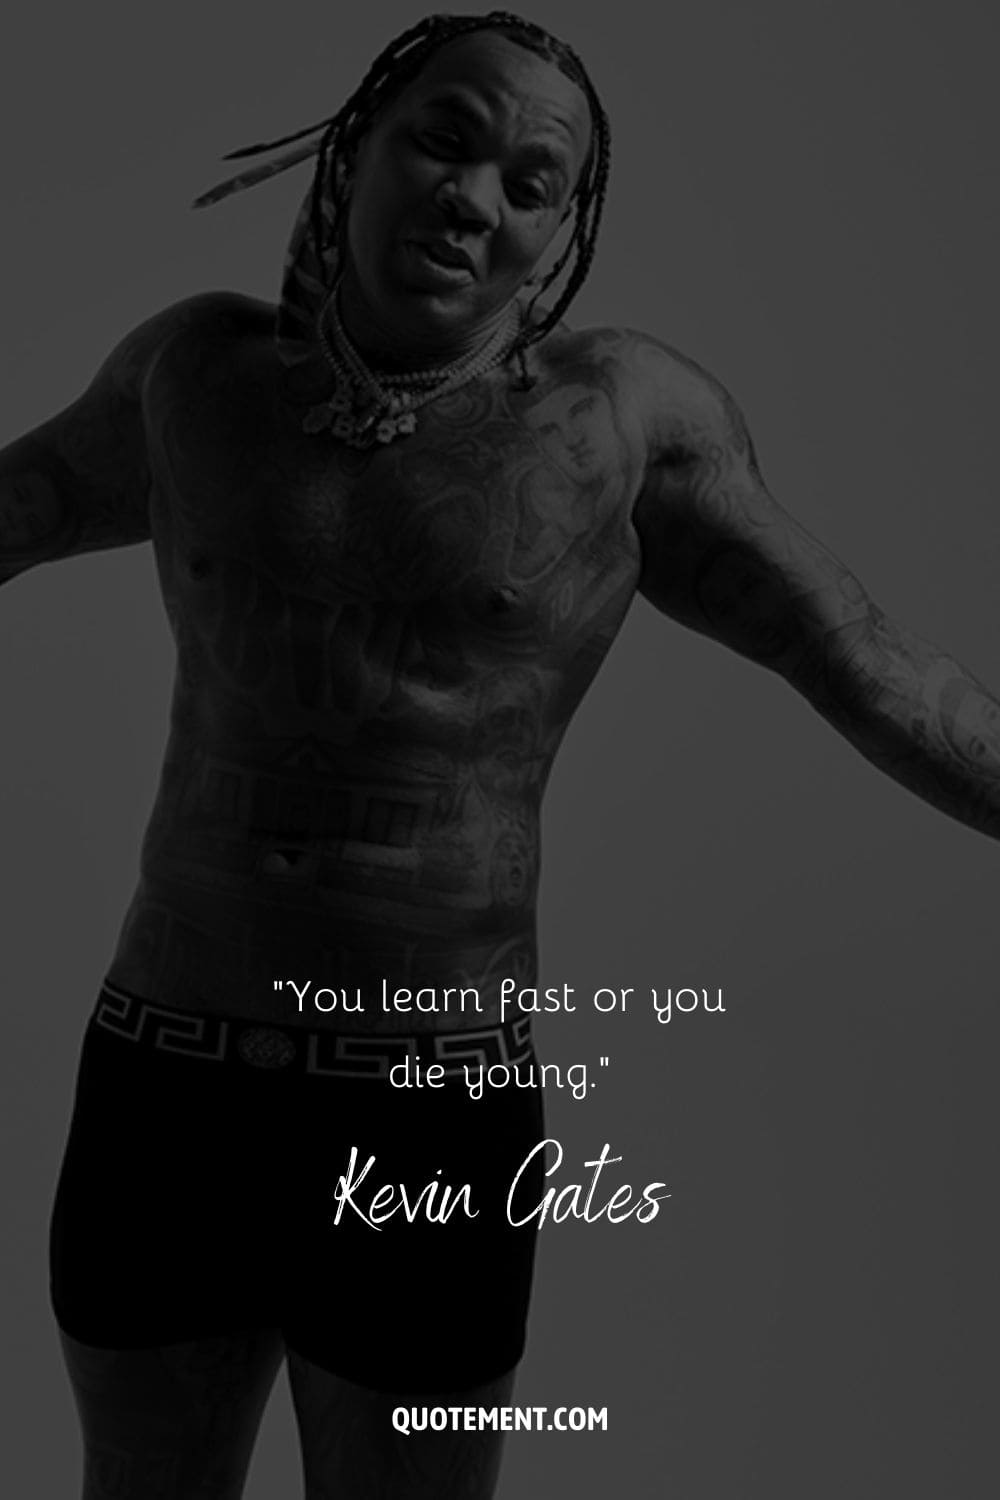 “You learn fast or you die young.” – Kevin Gates